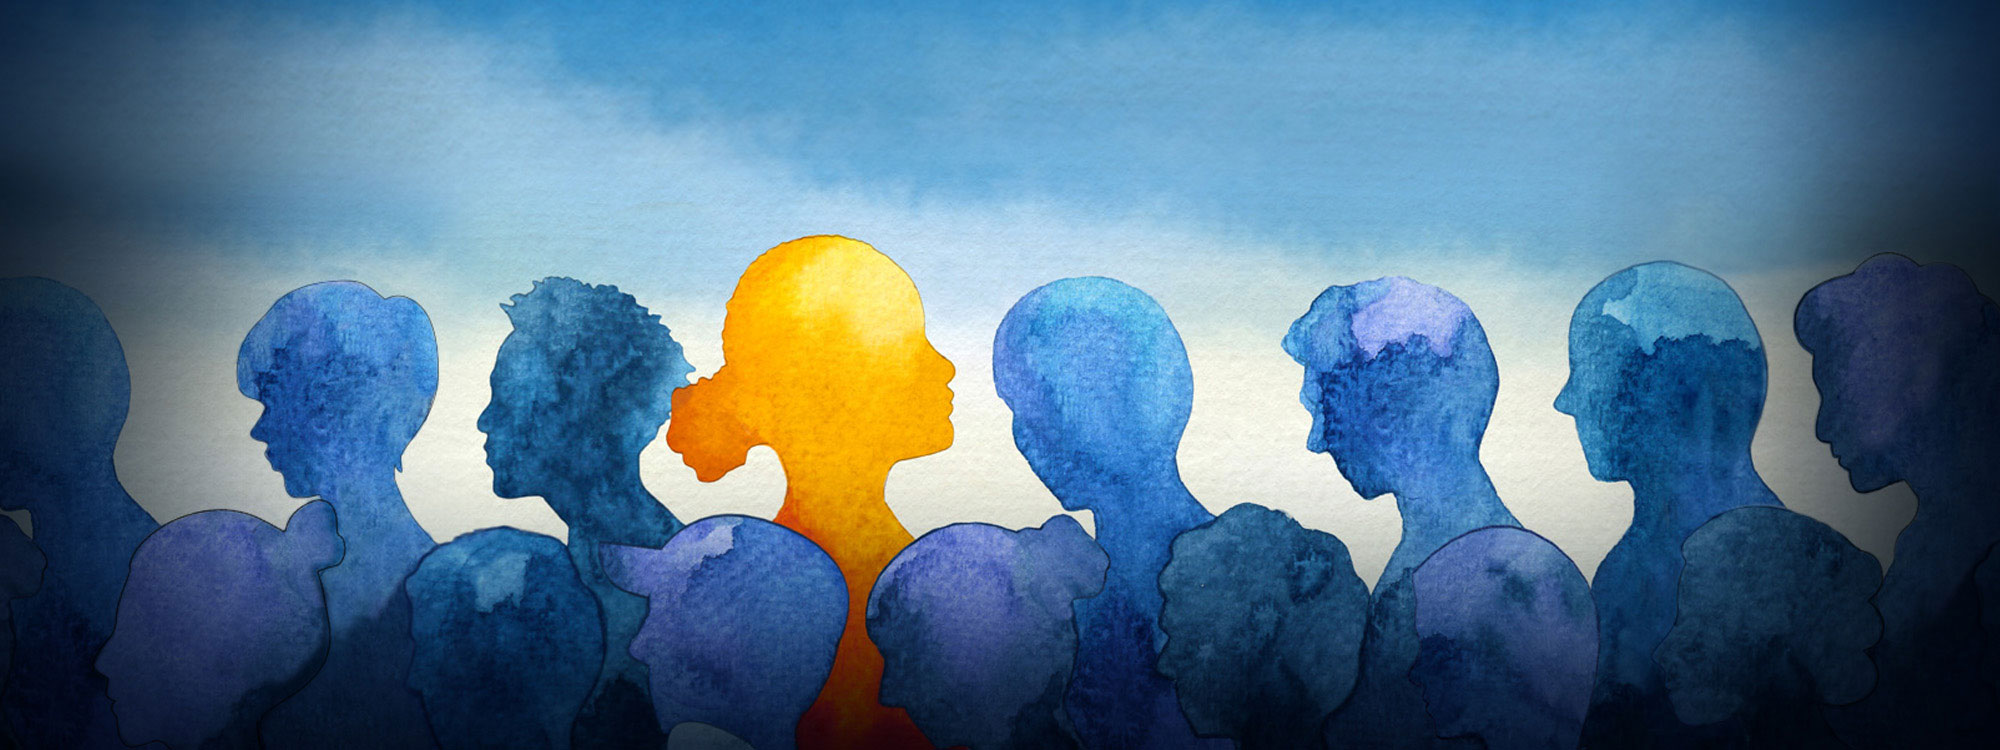 Watercolour silhouette of people's heads. 